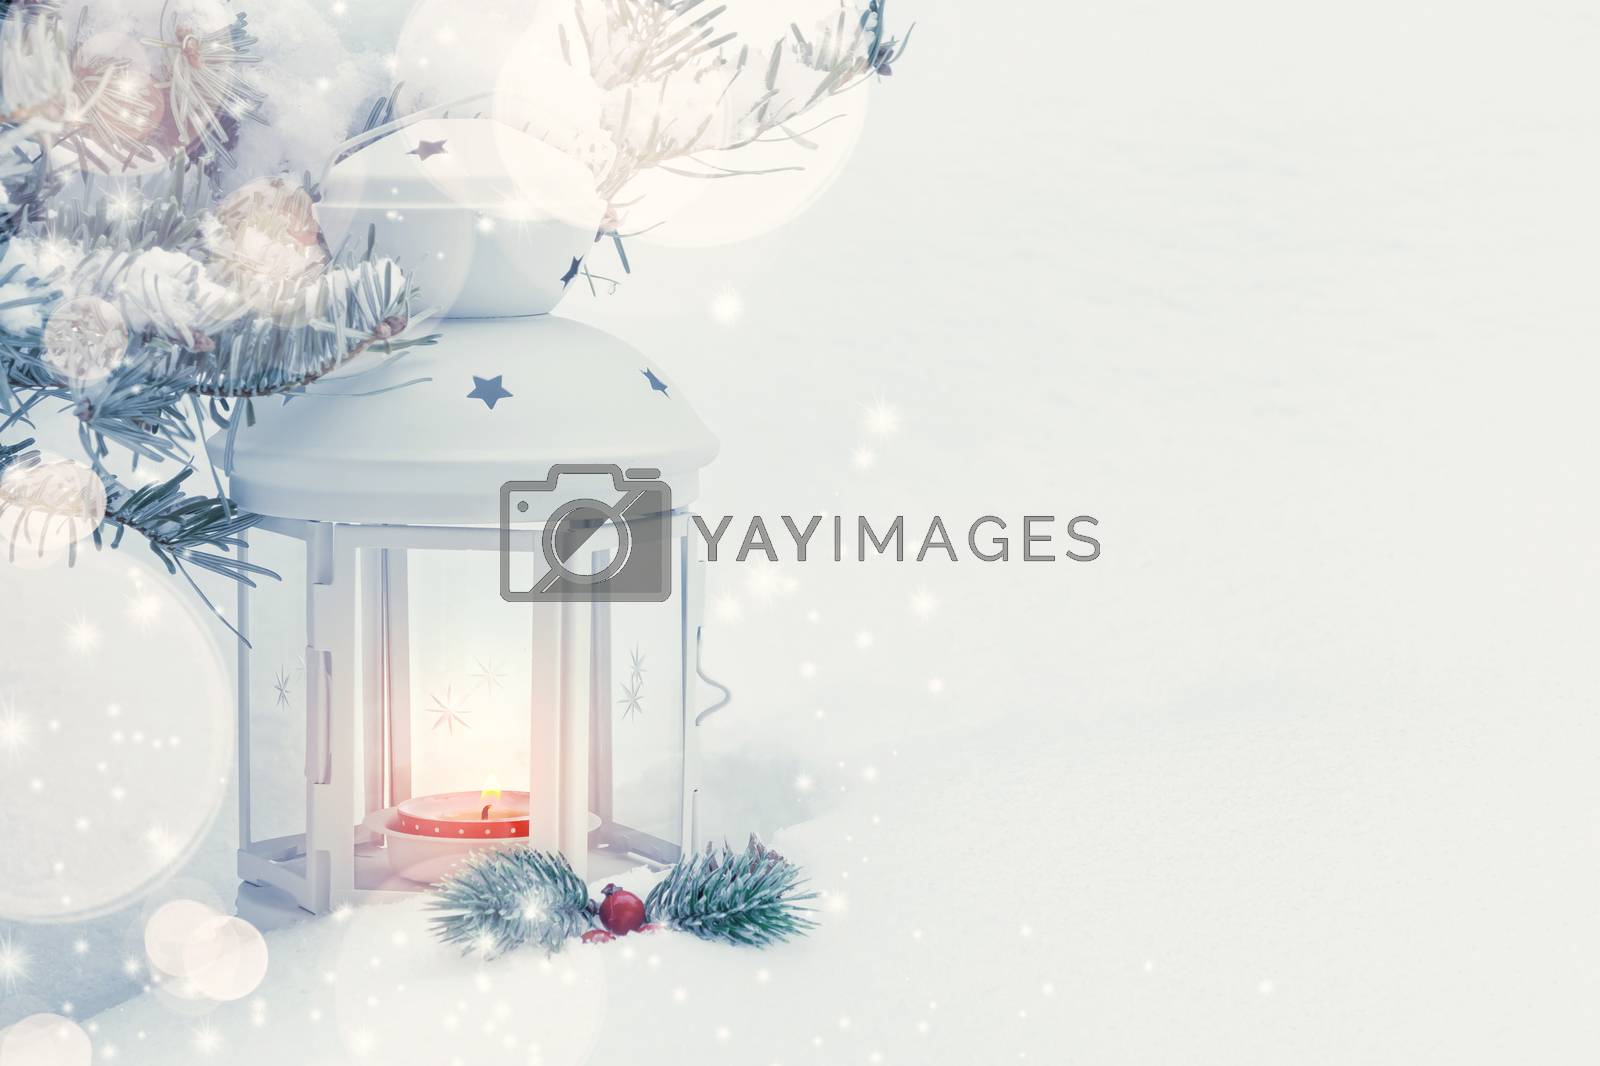 Royalty free image of Christmas composition - a lantern with a burning candle and decorations under the Christmas tree, copy space, place for text by galsand